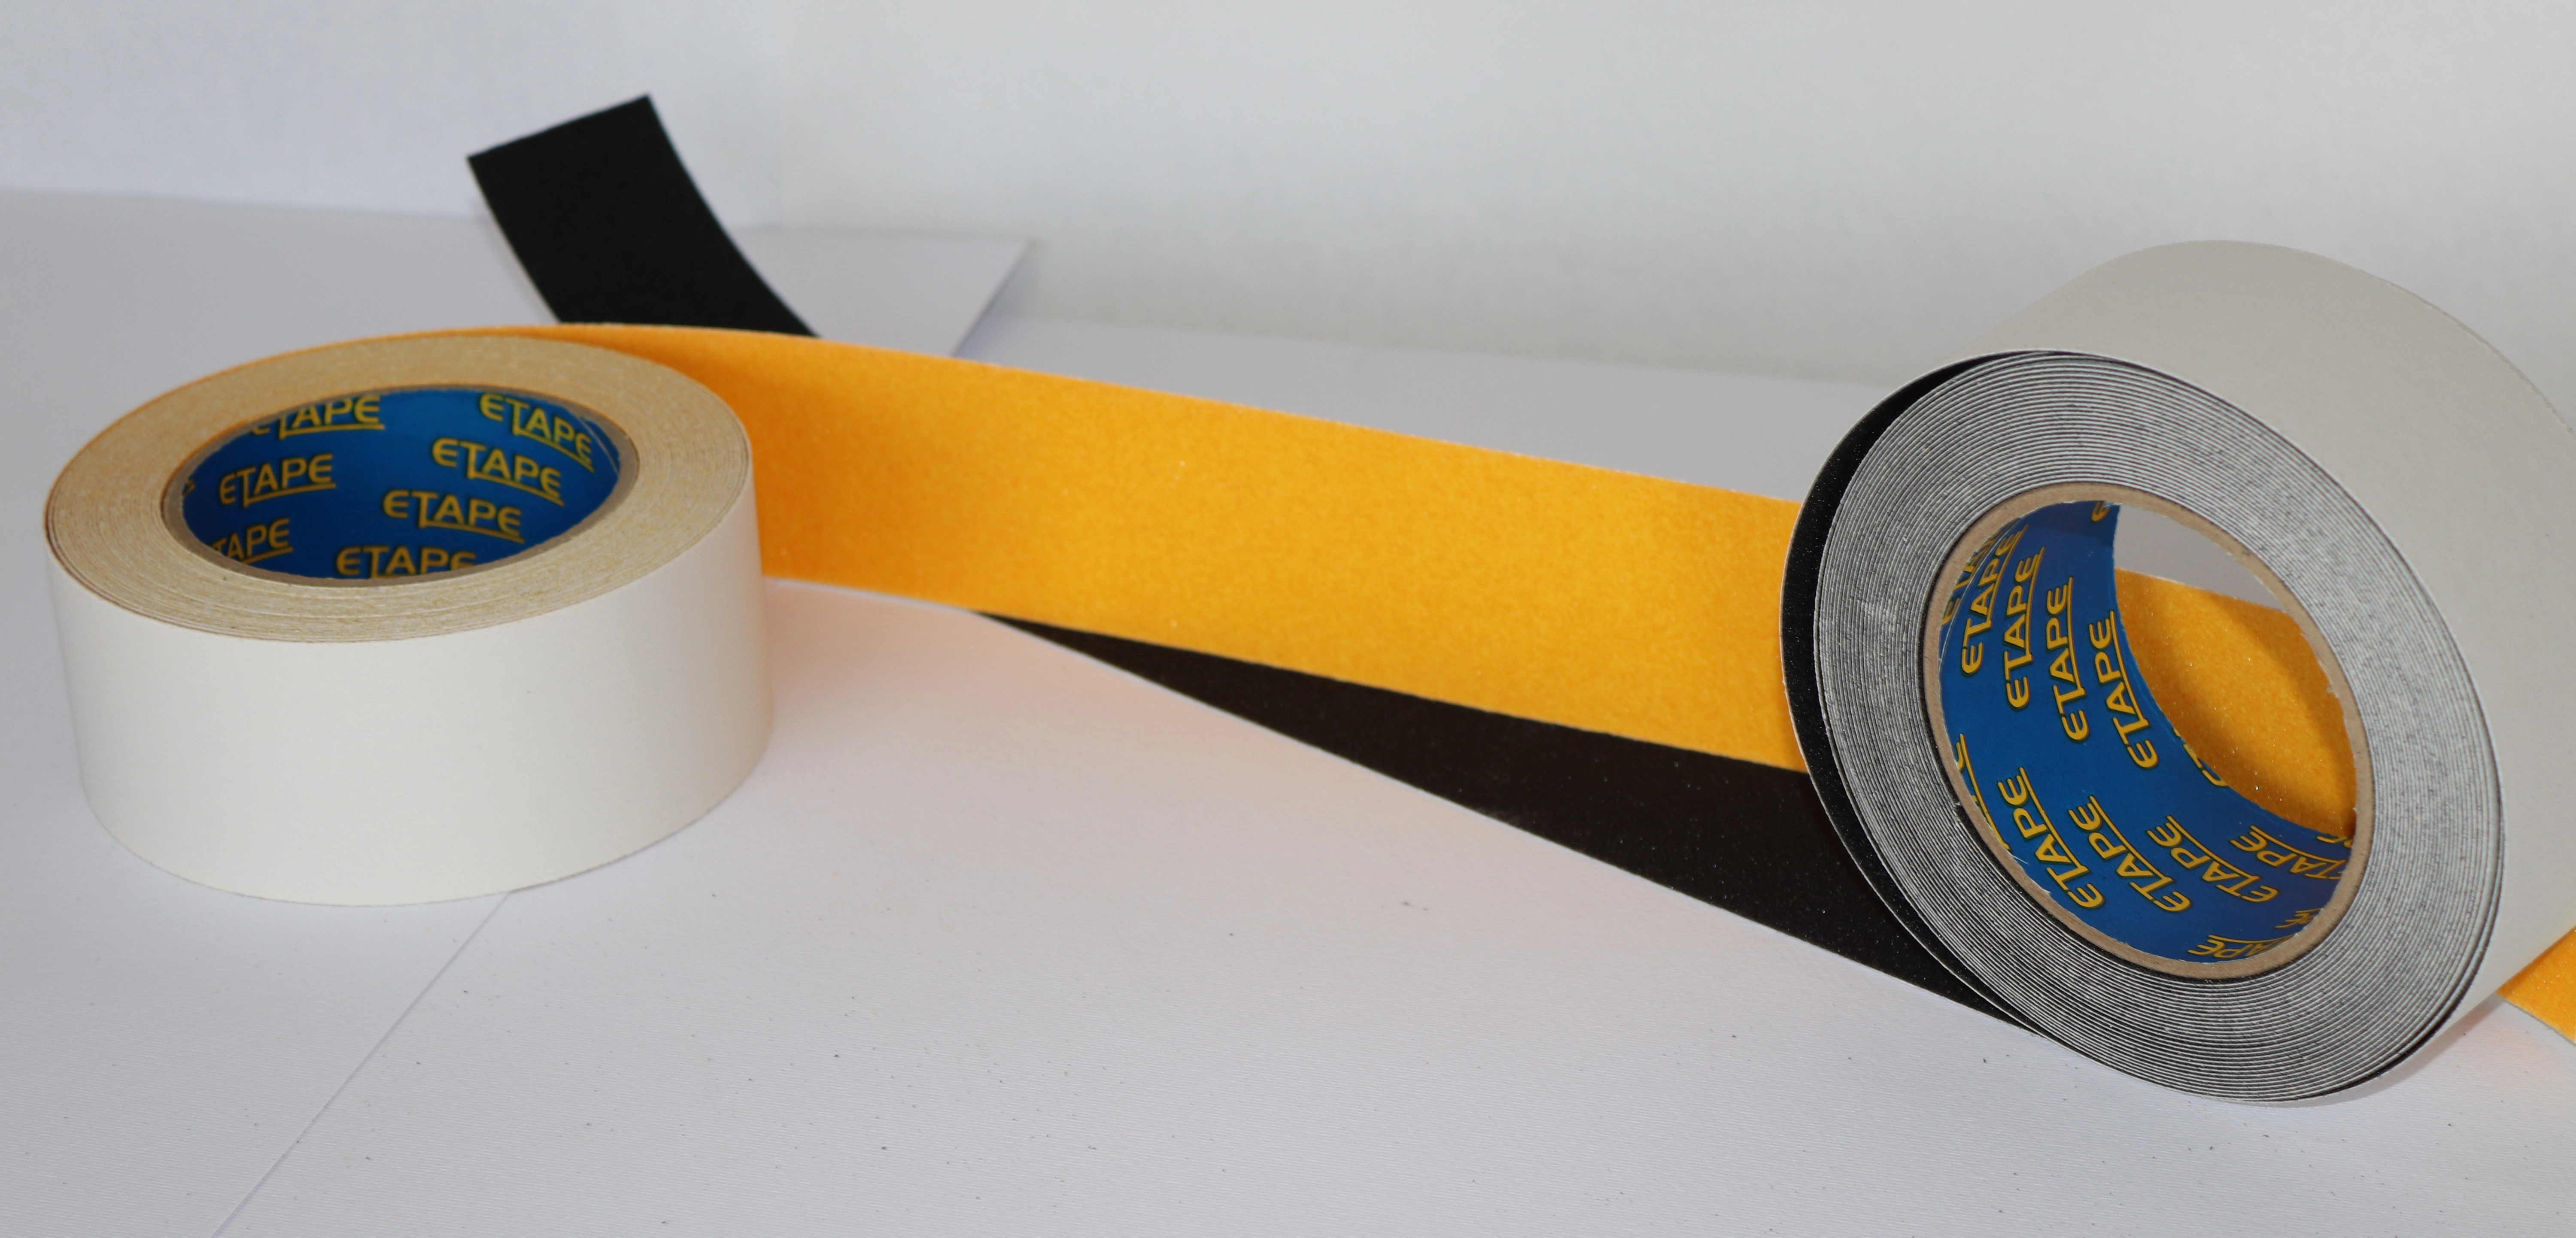 Safety walk tape used to quick resolutions of problematic slippery surfaces sold by Easitape